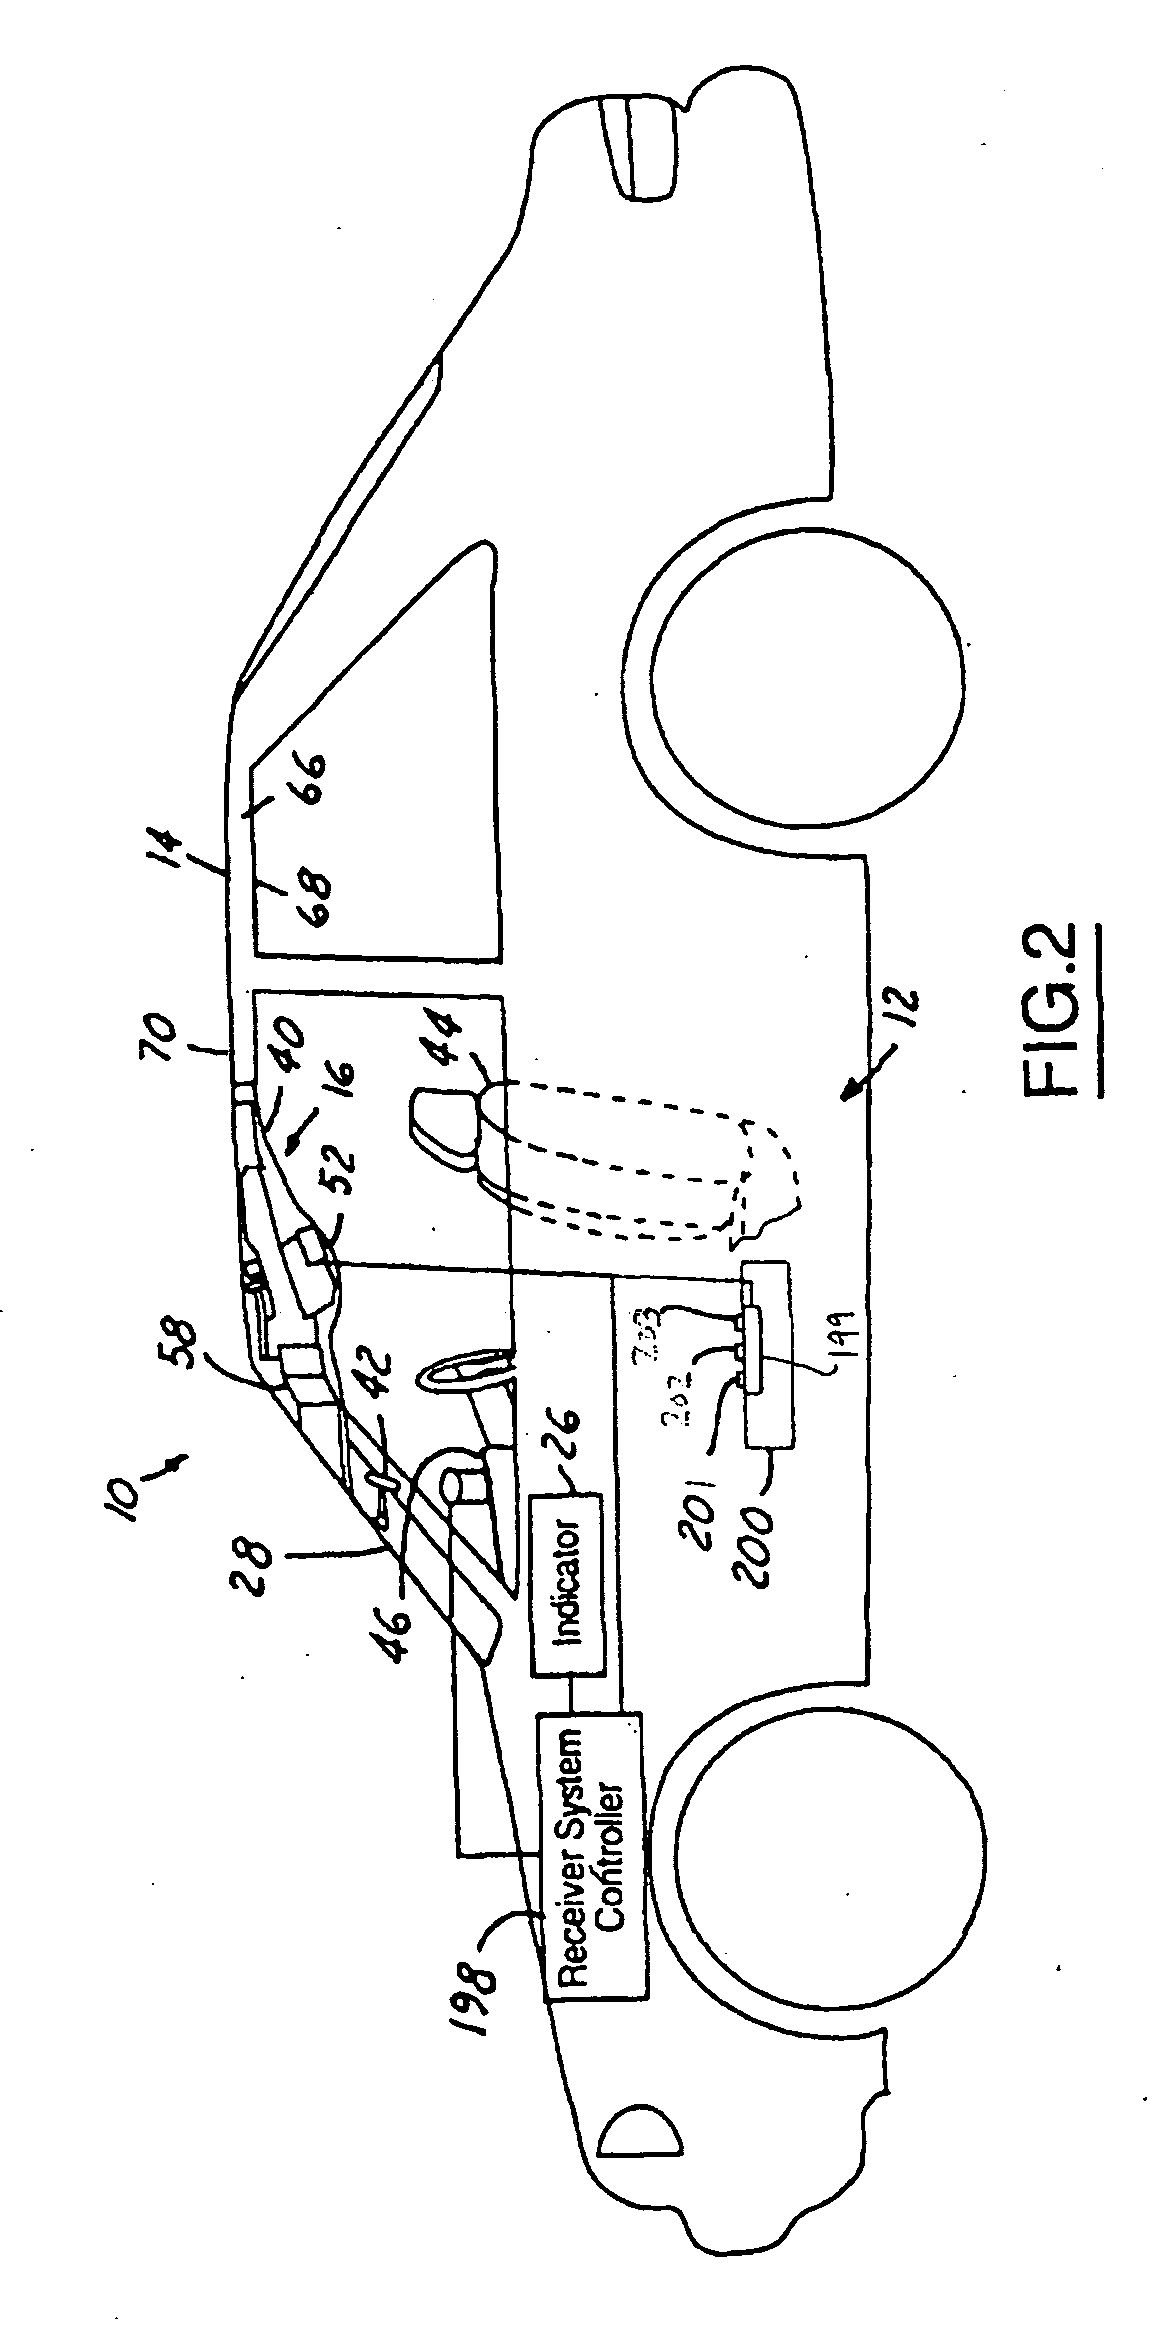 Component alignment maintaining module for an active night vision system mounted within an interior cabin of a vehicle